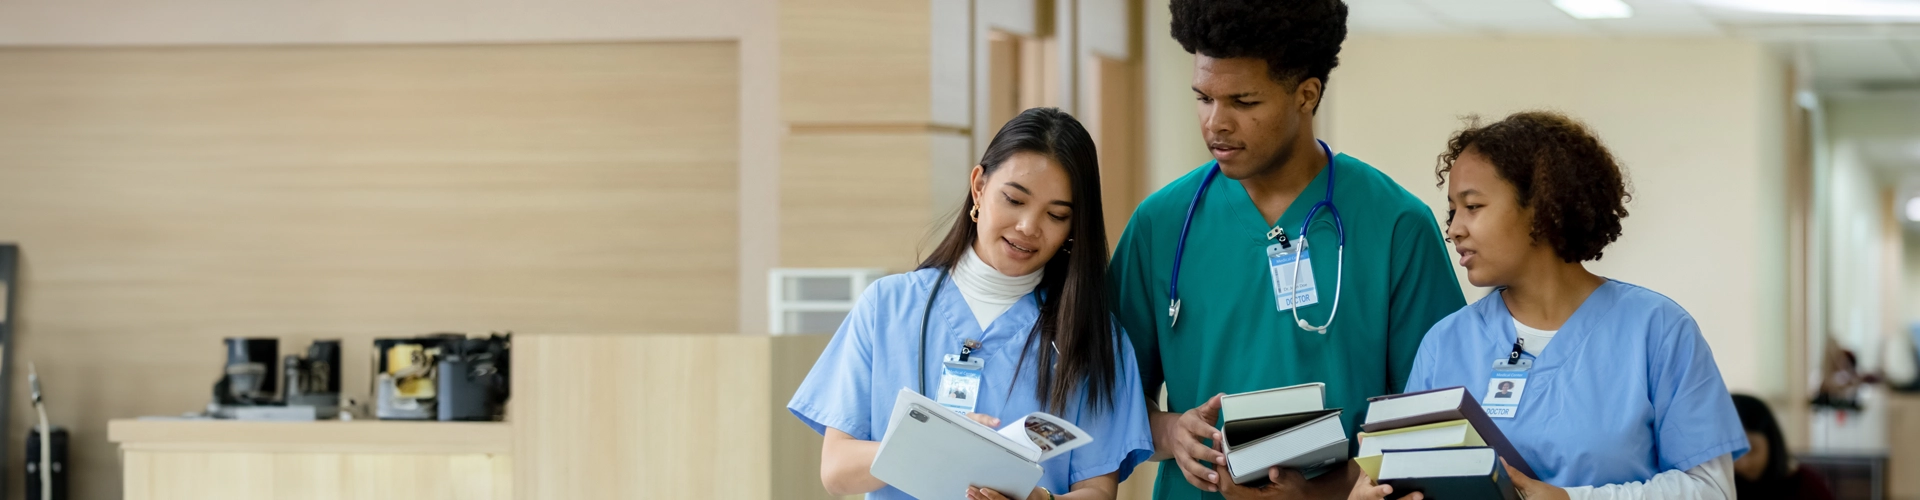 Core Curriculum of an RN to BSN Program: What to Expect